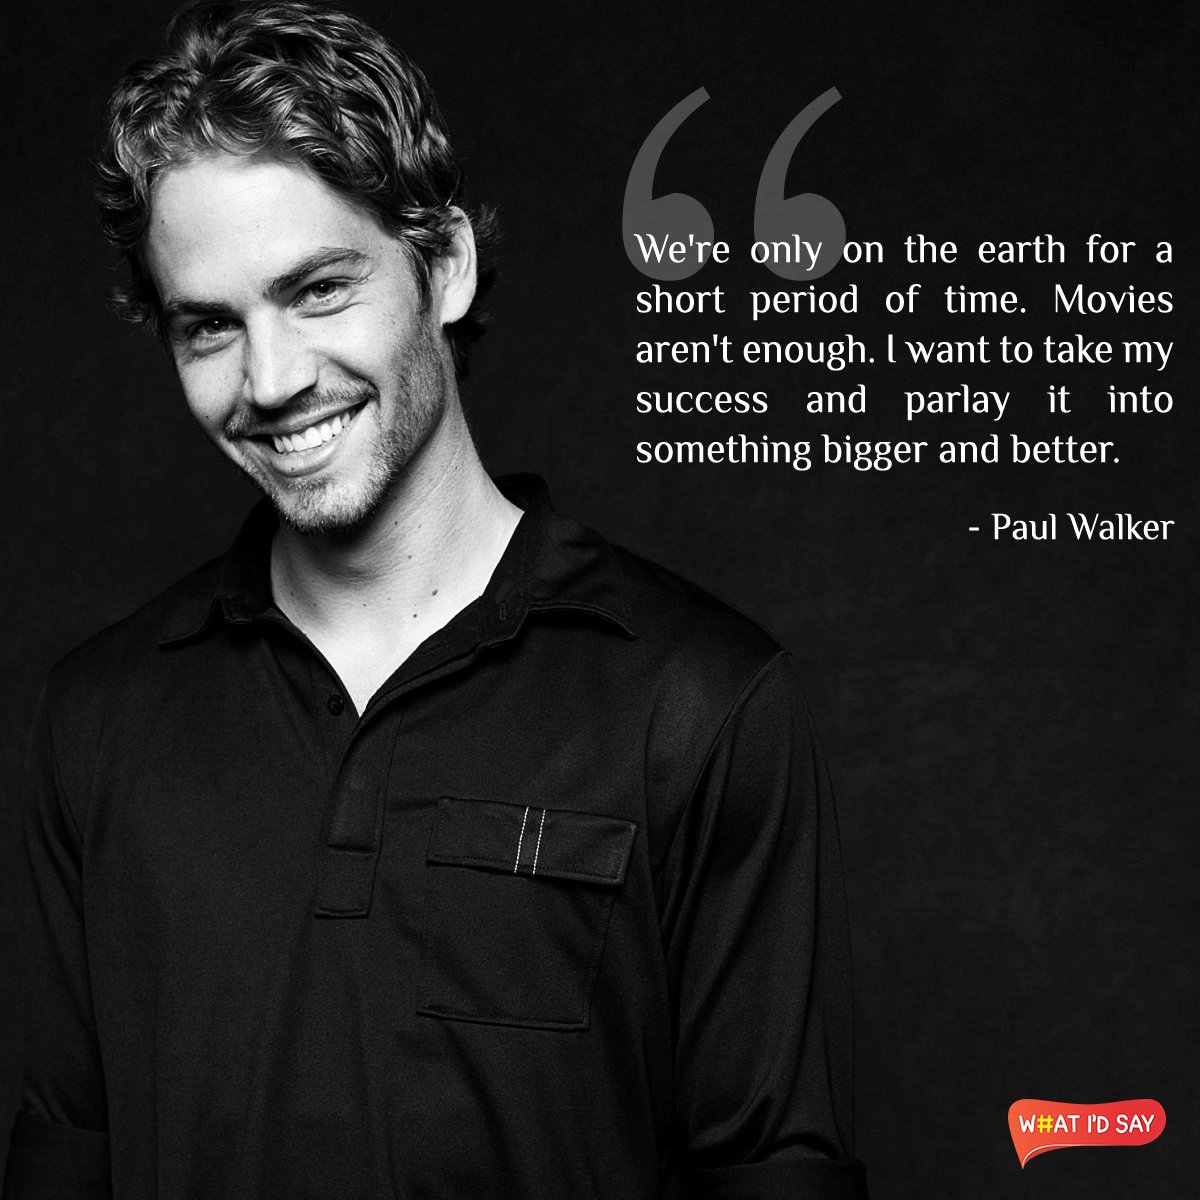 Remembering the incredibly talented and gifted actor, #PaulWalker, on his 45th birthday today- the man who is still alive in the memories of his fans, and will continue to be...
#happybirthdaypaulwalker #RIPPaulWalker #TeamPW #FastAndFurious